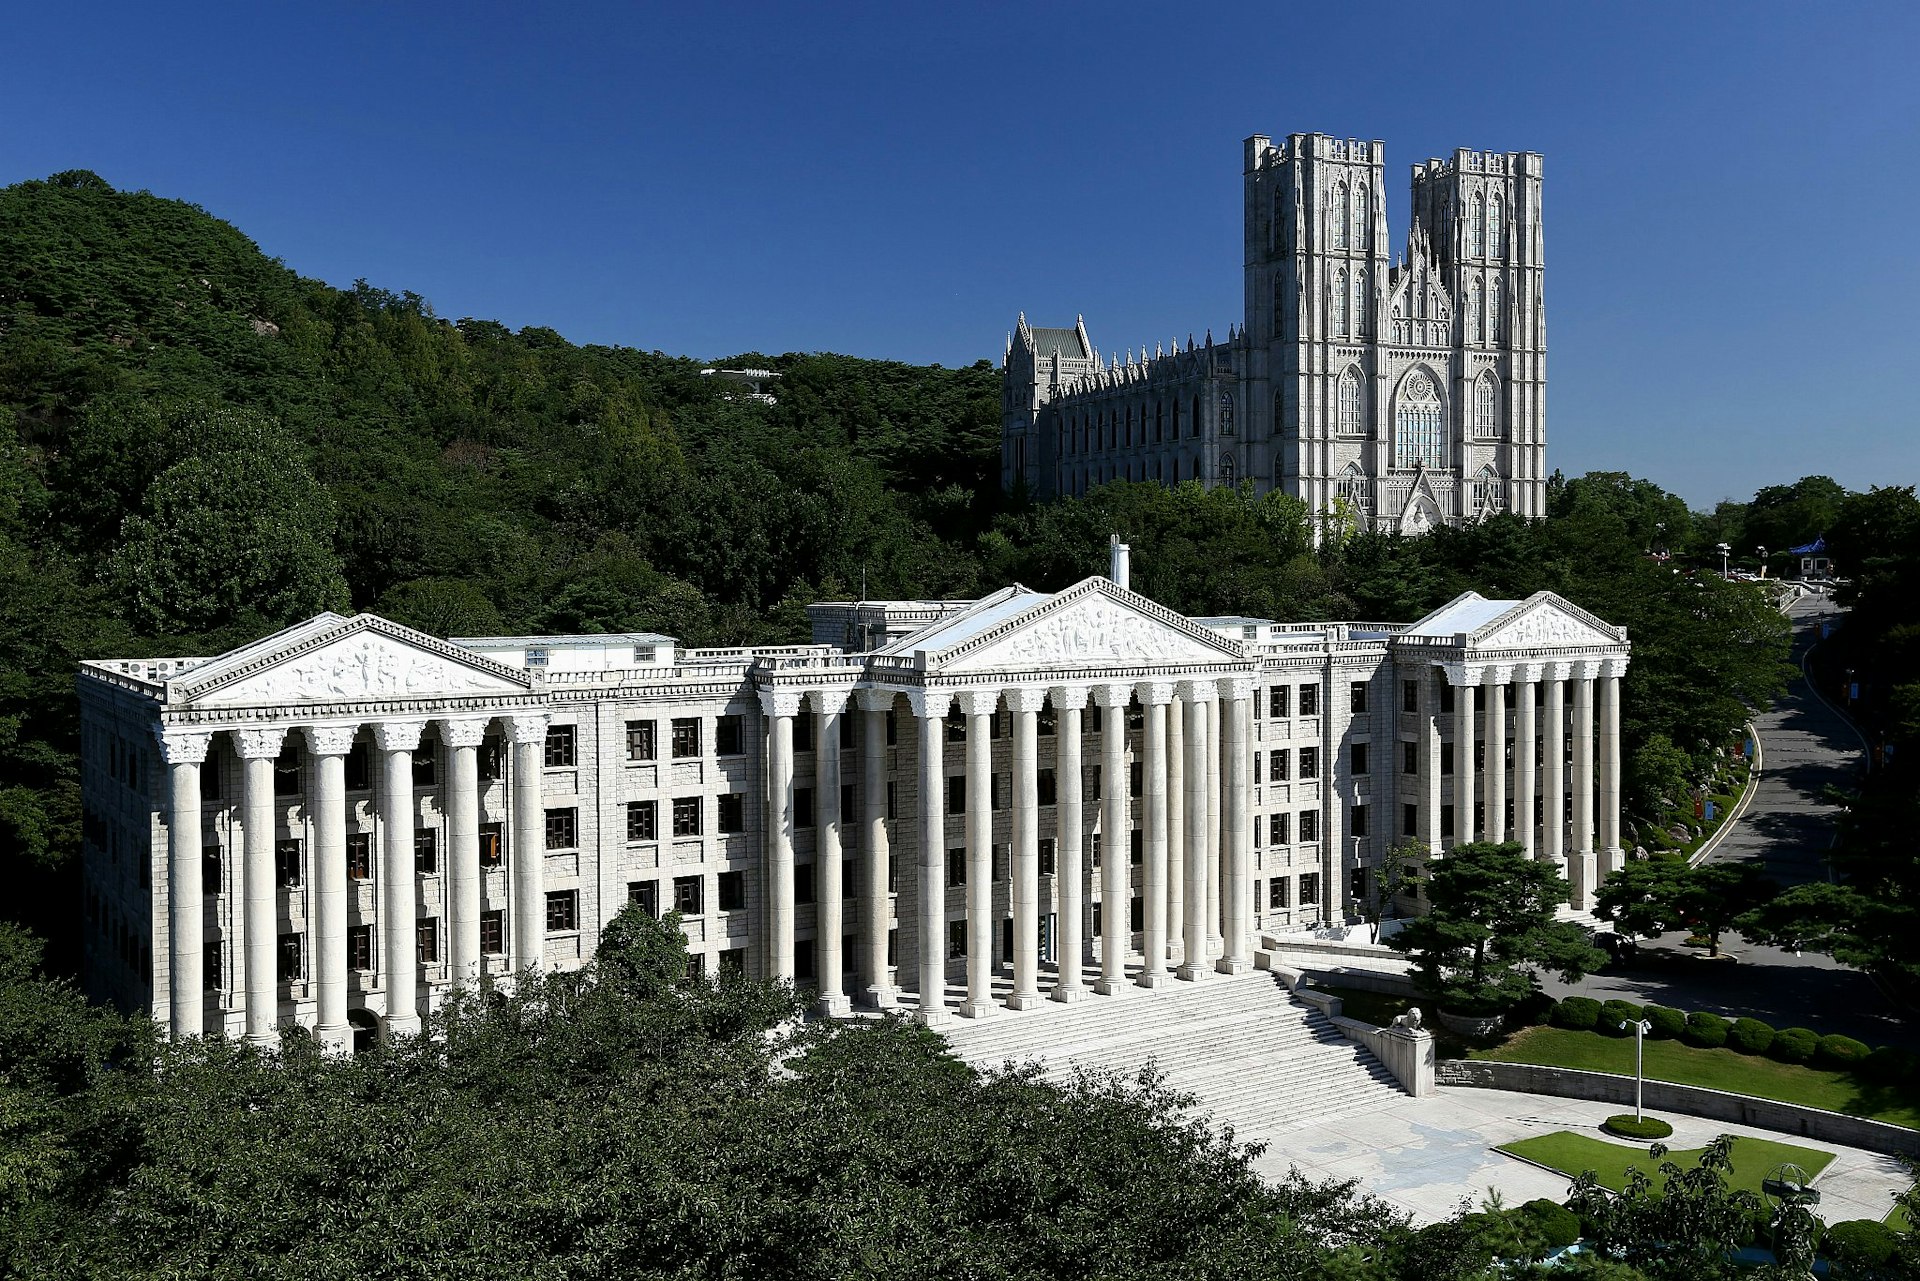 A pair of buildings on the Kyung Hee University campus in Seoul, South Korea: the white, colonnaded University Administration Building, reminiscent of a Greek temple, in the foreground, with the ornate Grand Peace Hall behind, resembling a cathedral. 